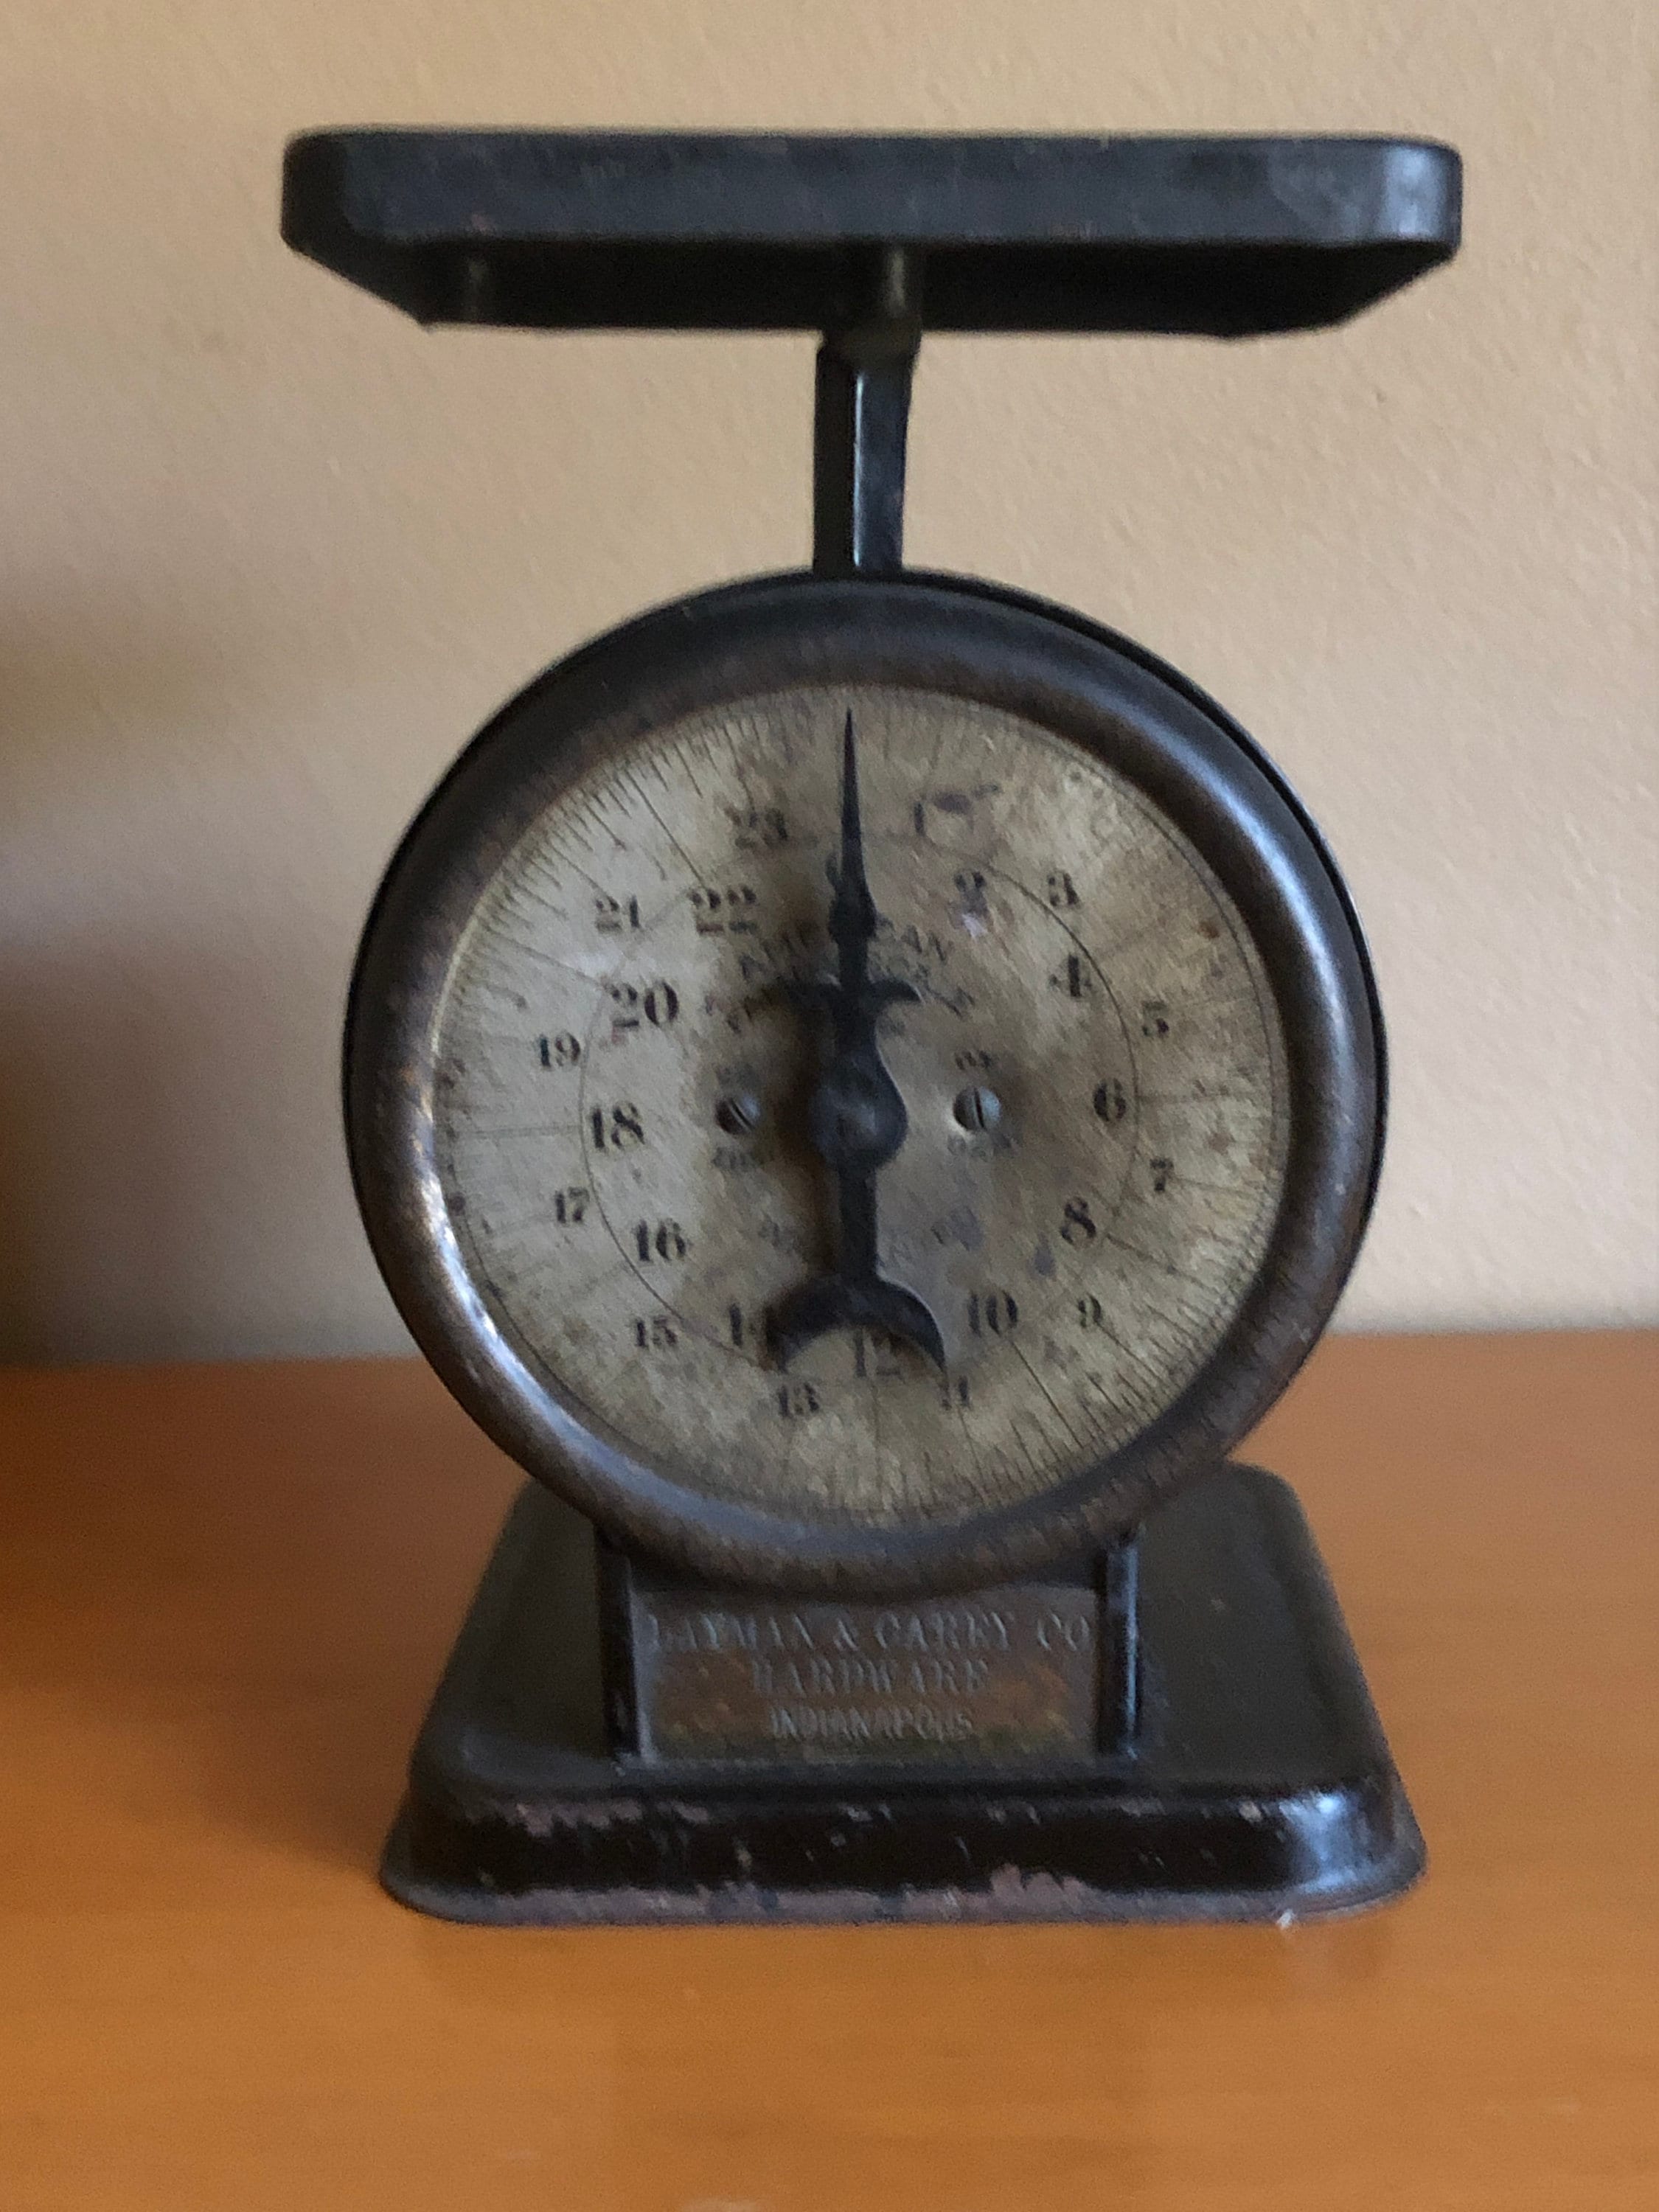 Circa 1949, Reliable Egg Scale, James Mfg. Co, with Original Instructions  and Weight Chart